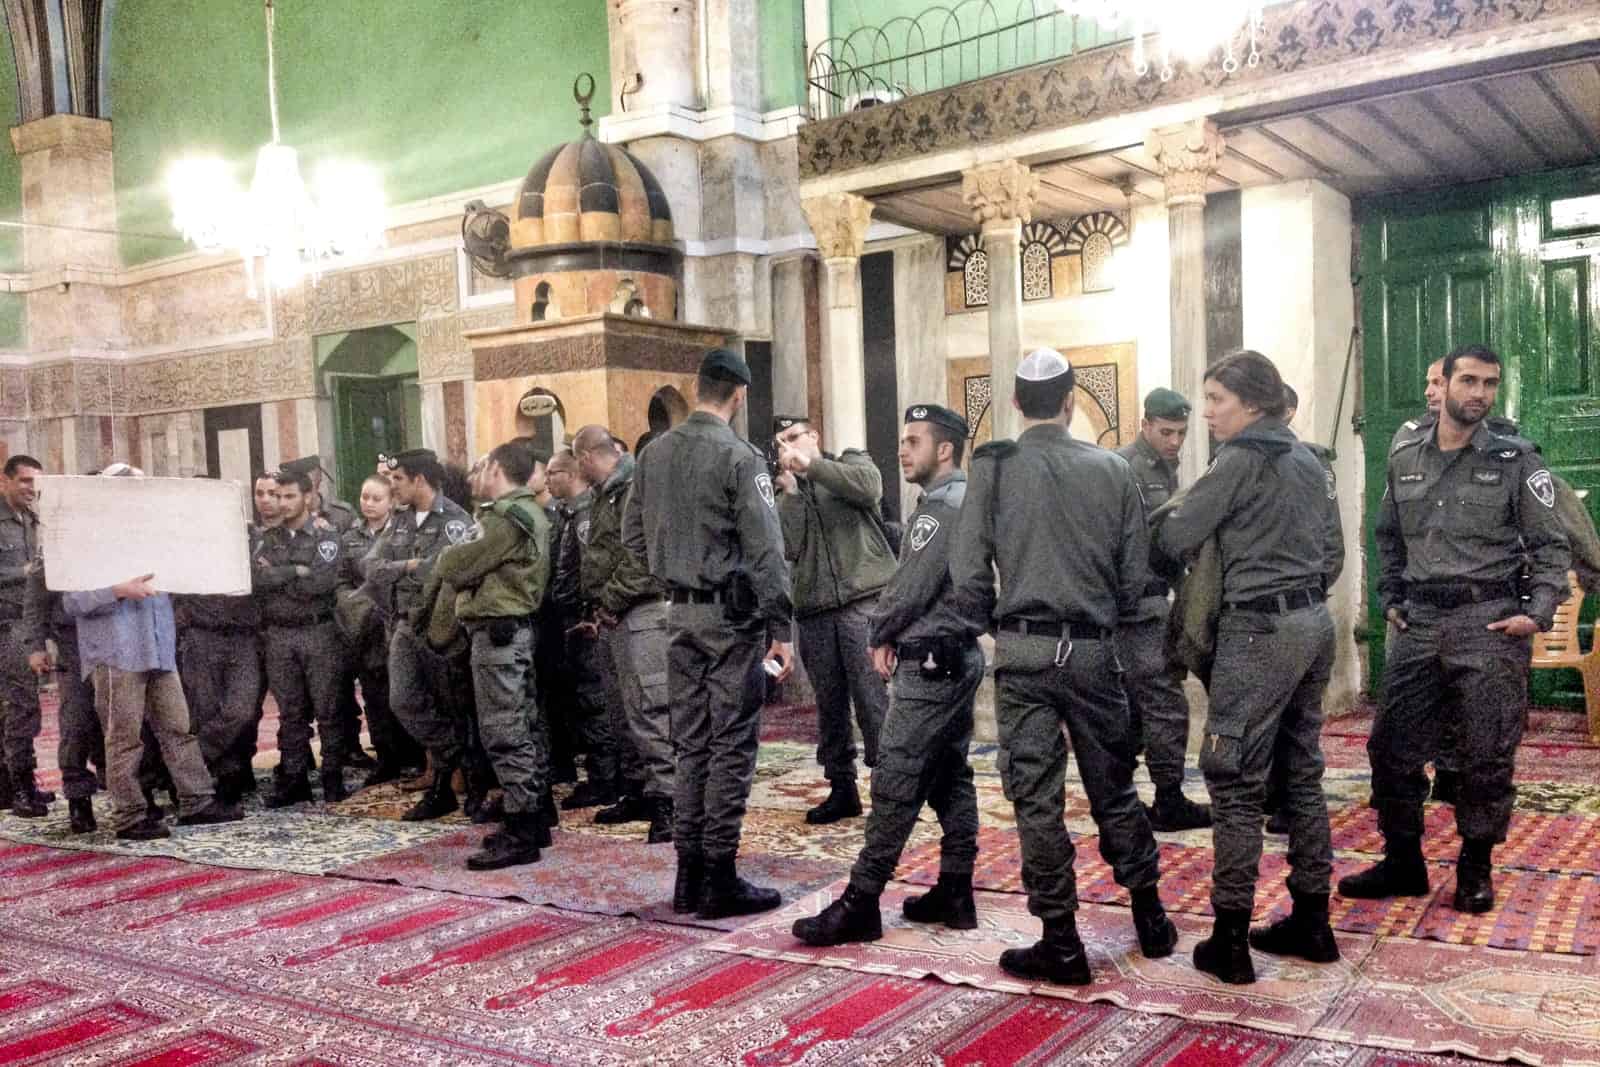 Israel Soliders inside the mosque of the Tomb of the Patriarchs in Hebron, West Bank